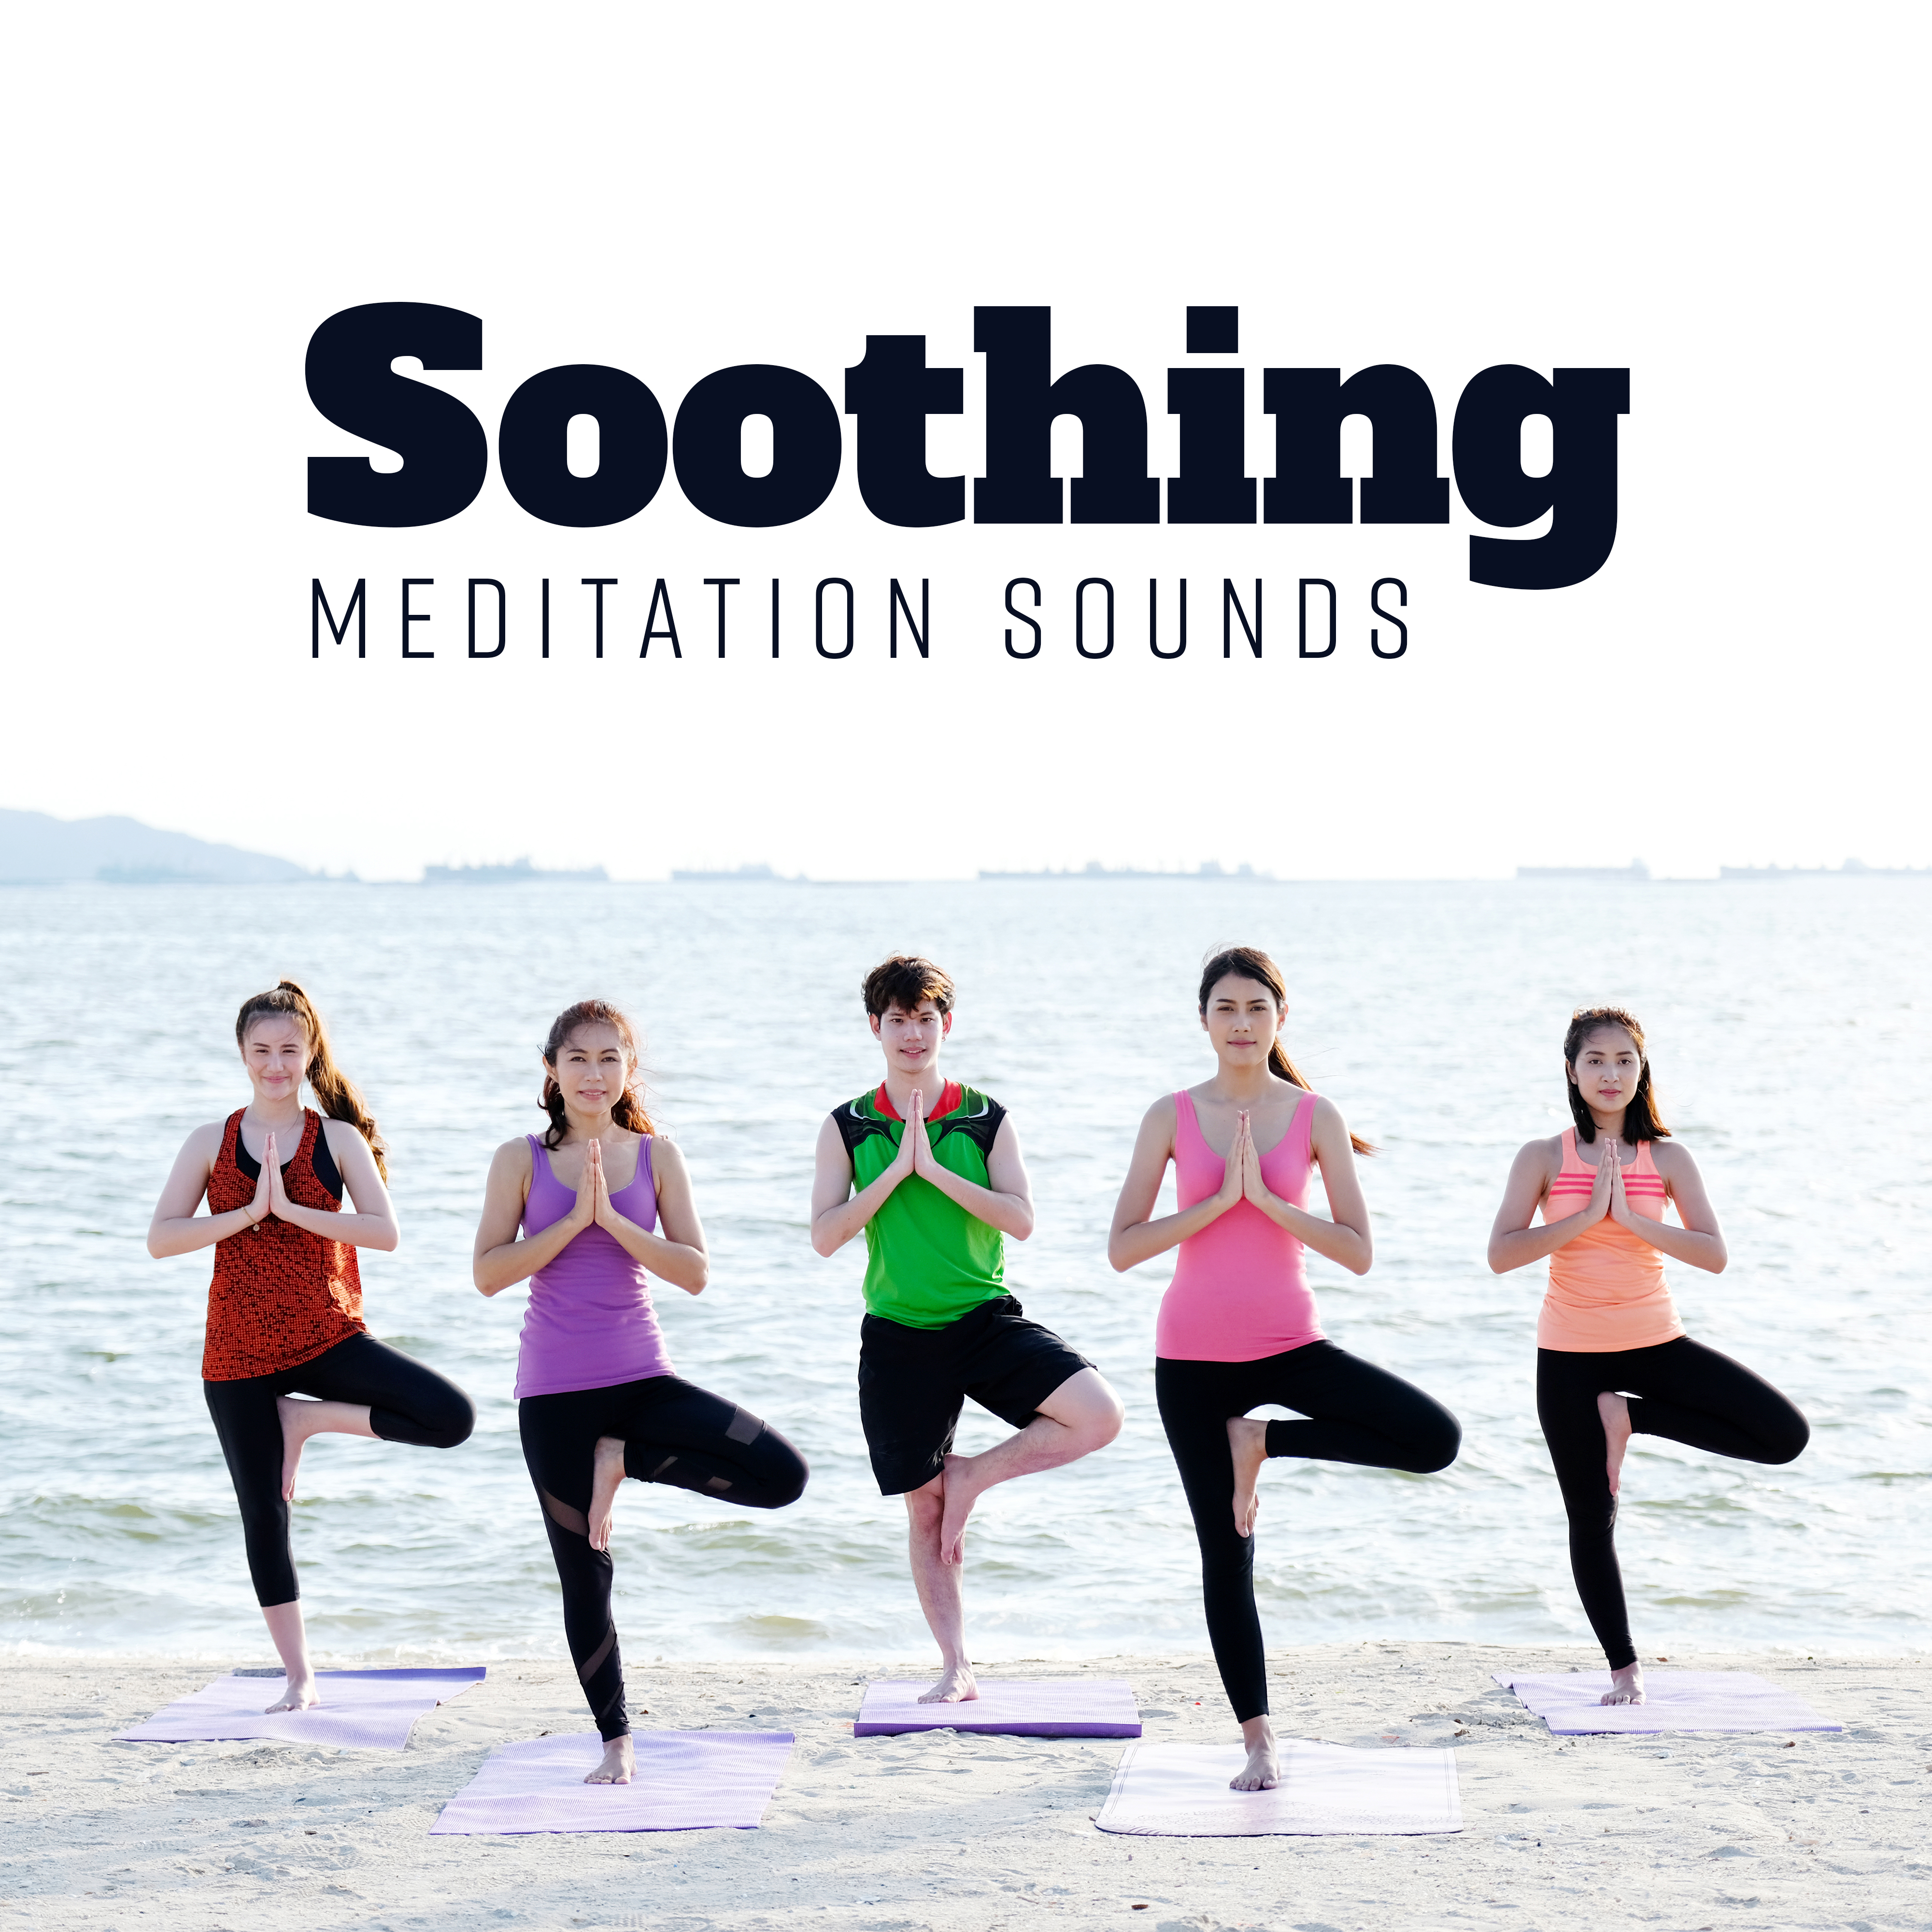 Soothing Meditation Sounds